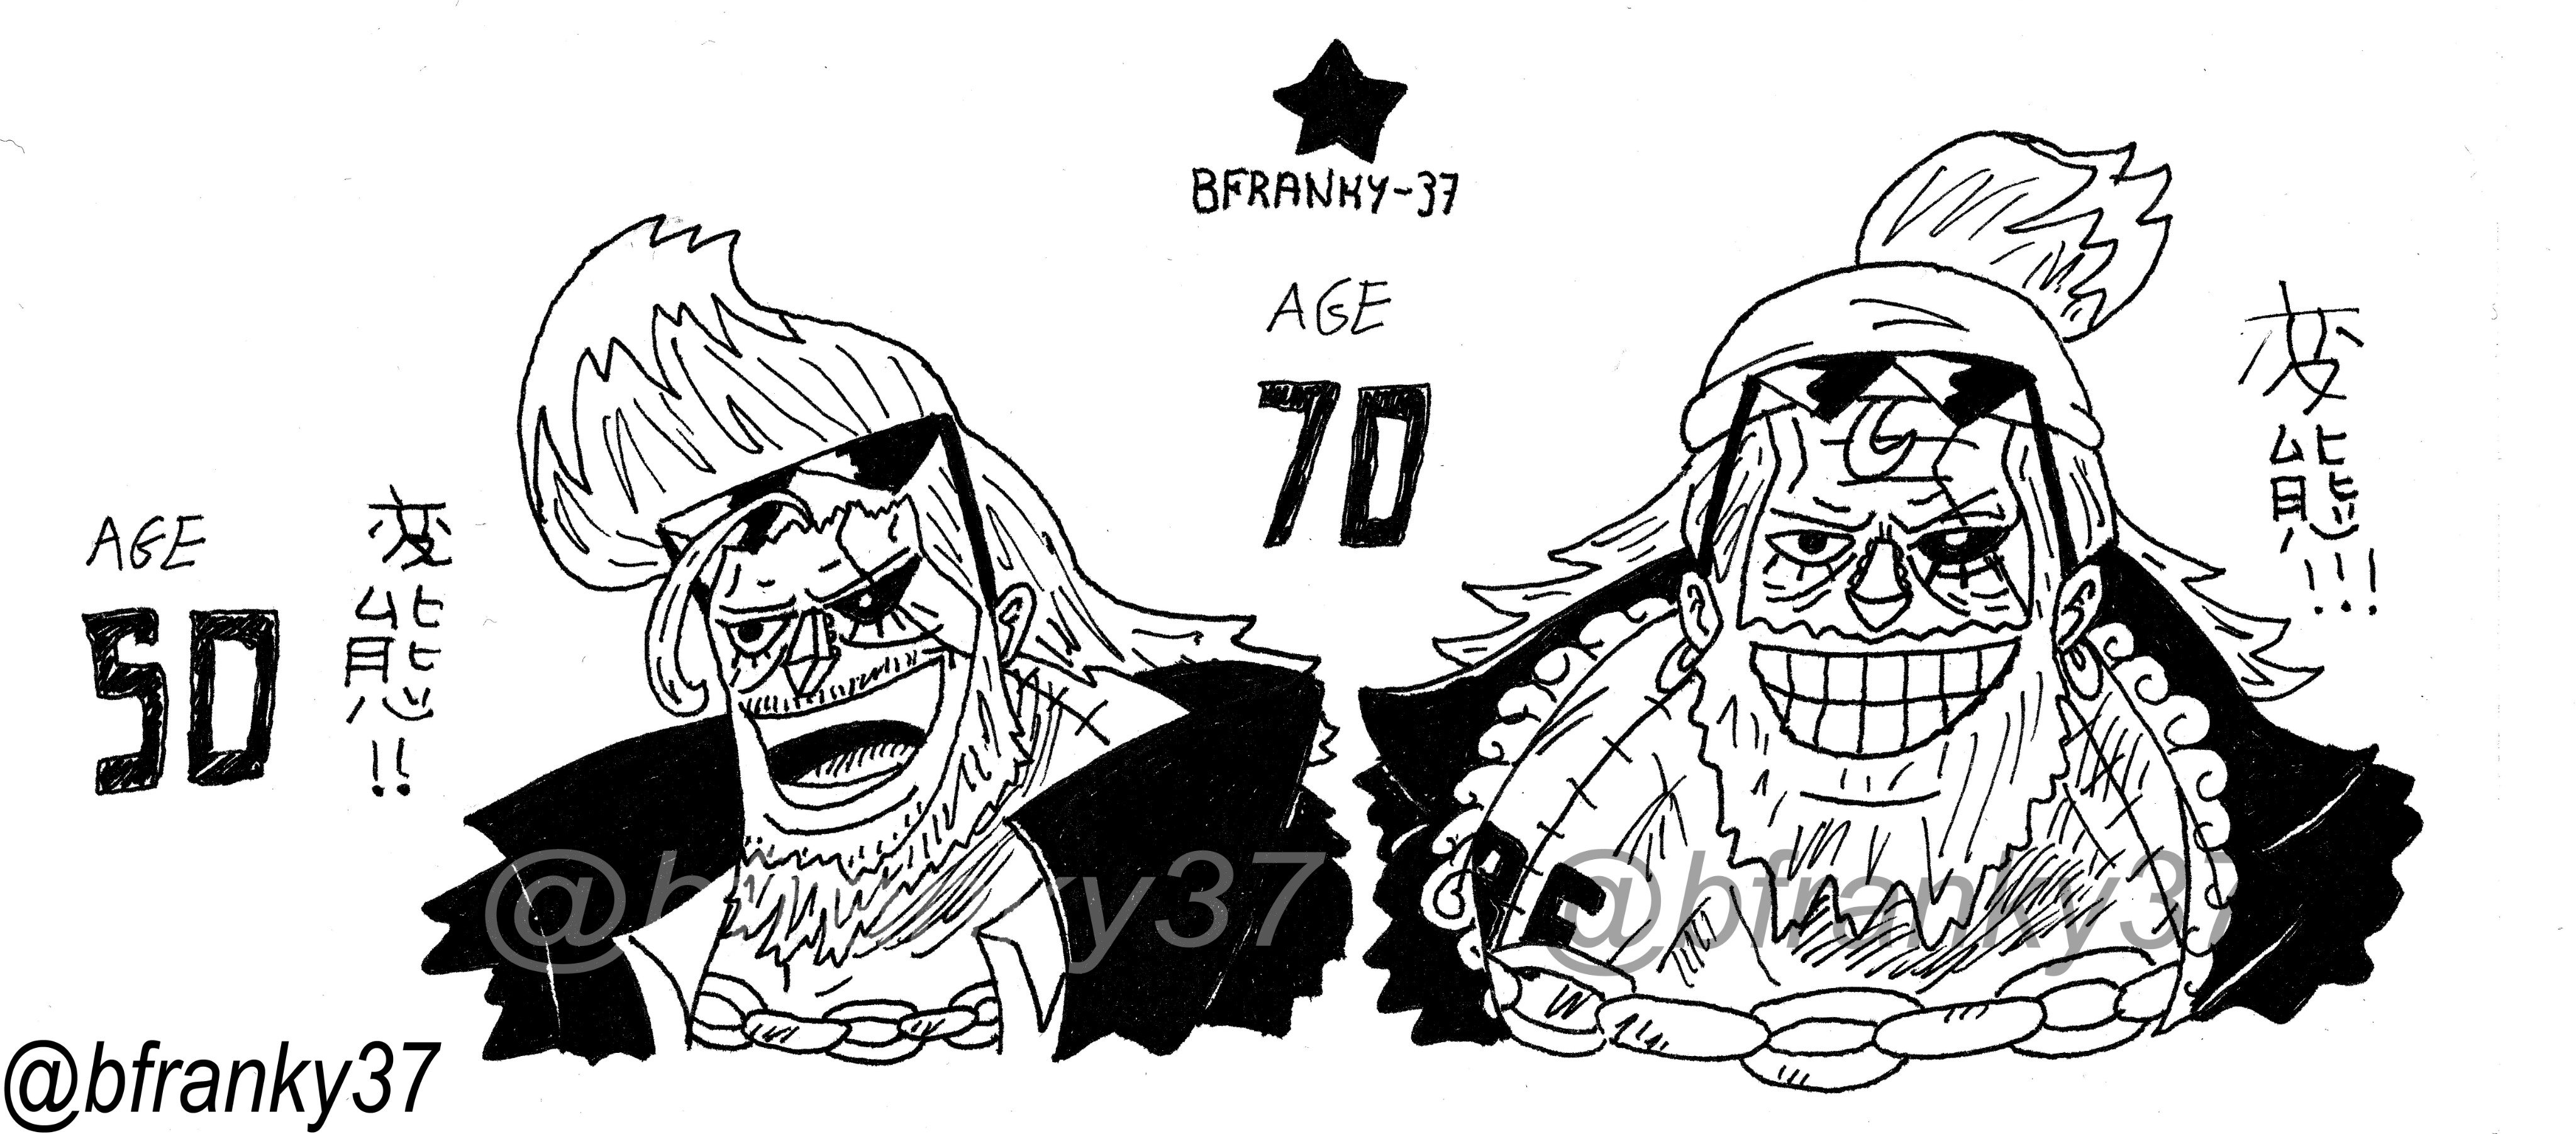 Bfranky 37 Bfranky 37 What Would Franky Look Like At Age 50 And Age 70 Take A Look Made By Me Suuupeeer Onepiece第1弾 Onepiece907 Bfranky37 Onepiece Sbs Onepiecesbs Sbs T Co X1rbukgjfs Twitter